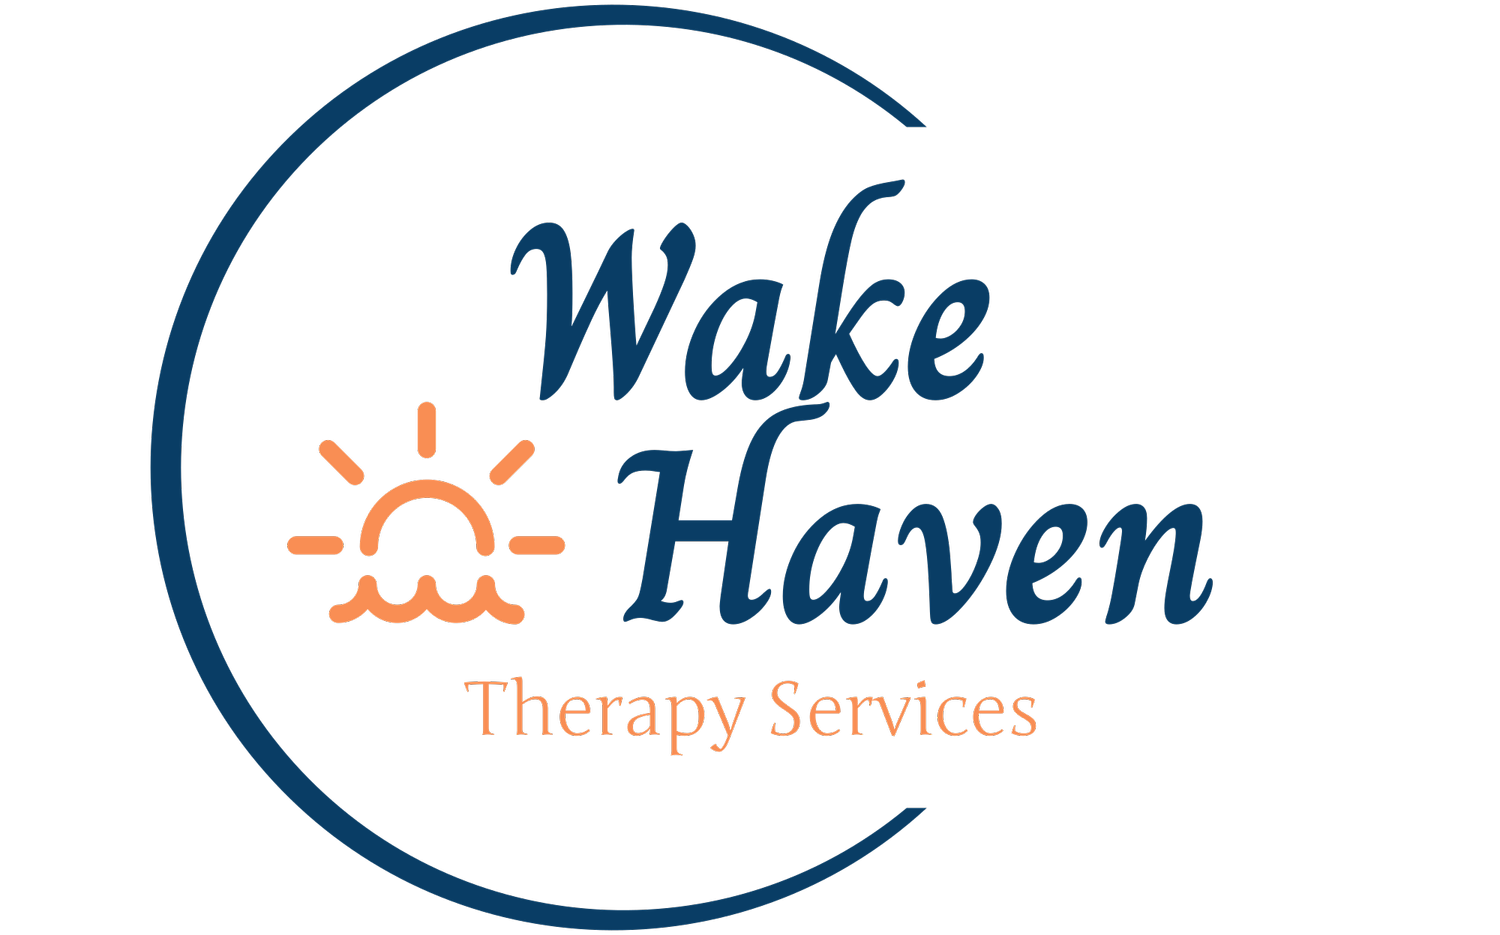 Wake Haven Therapy